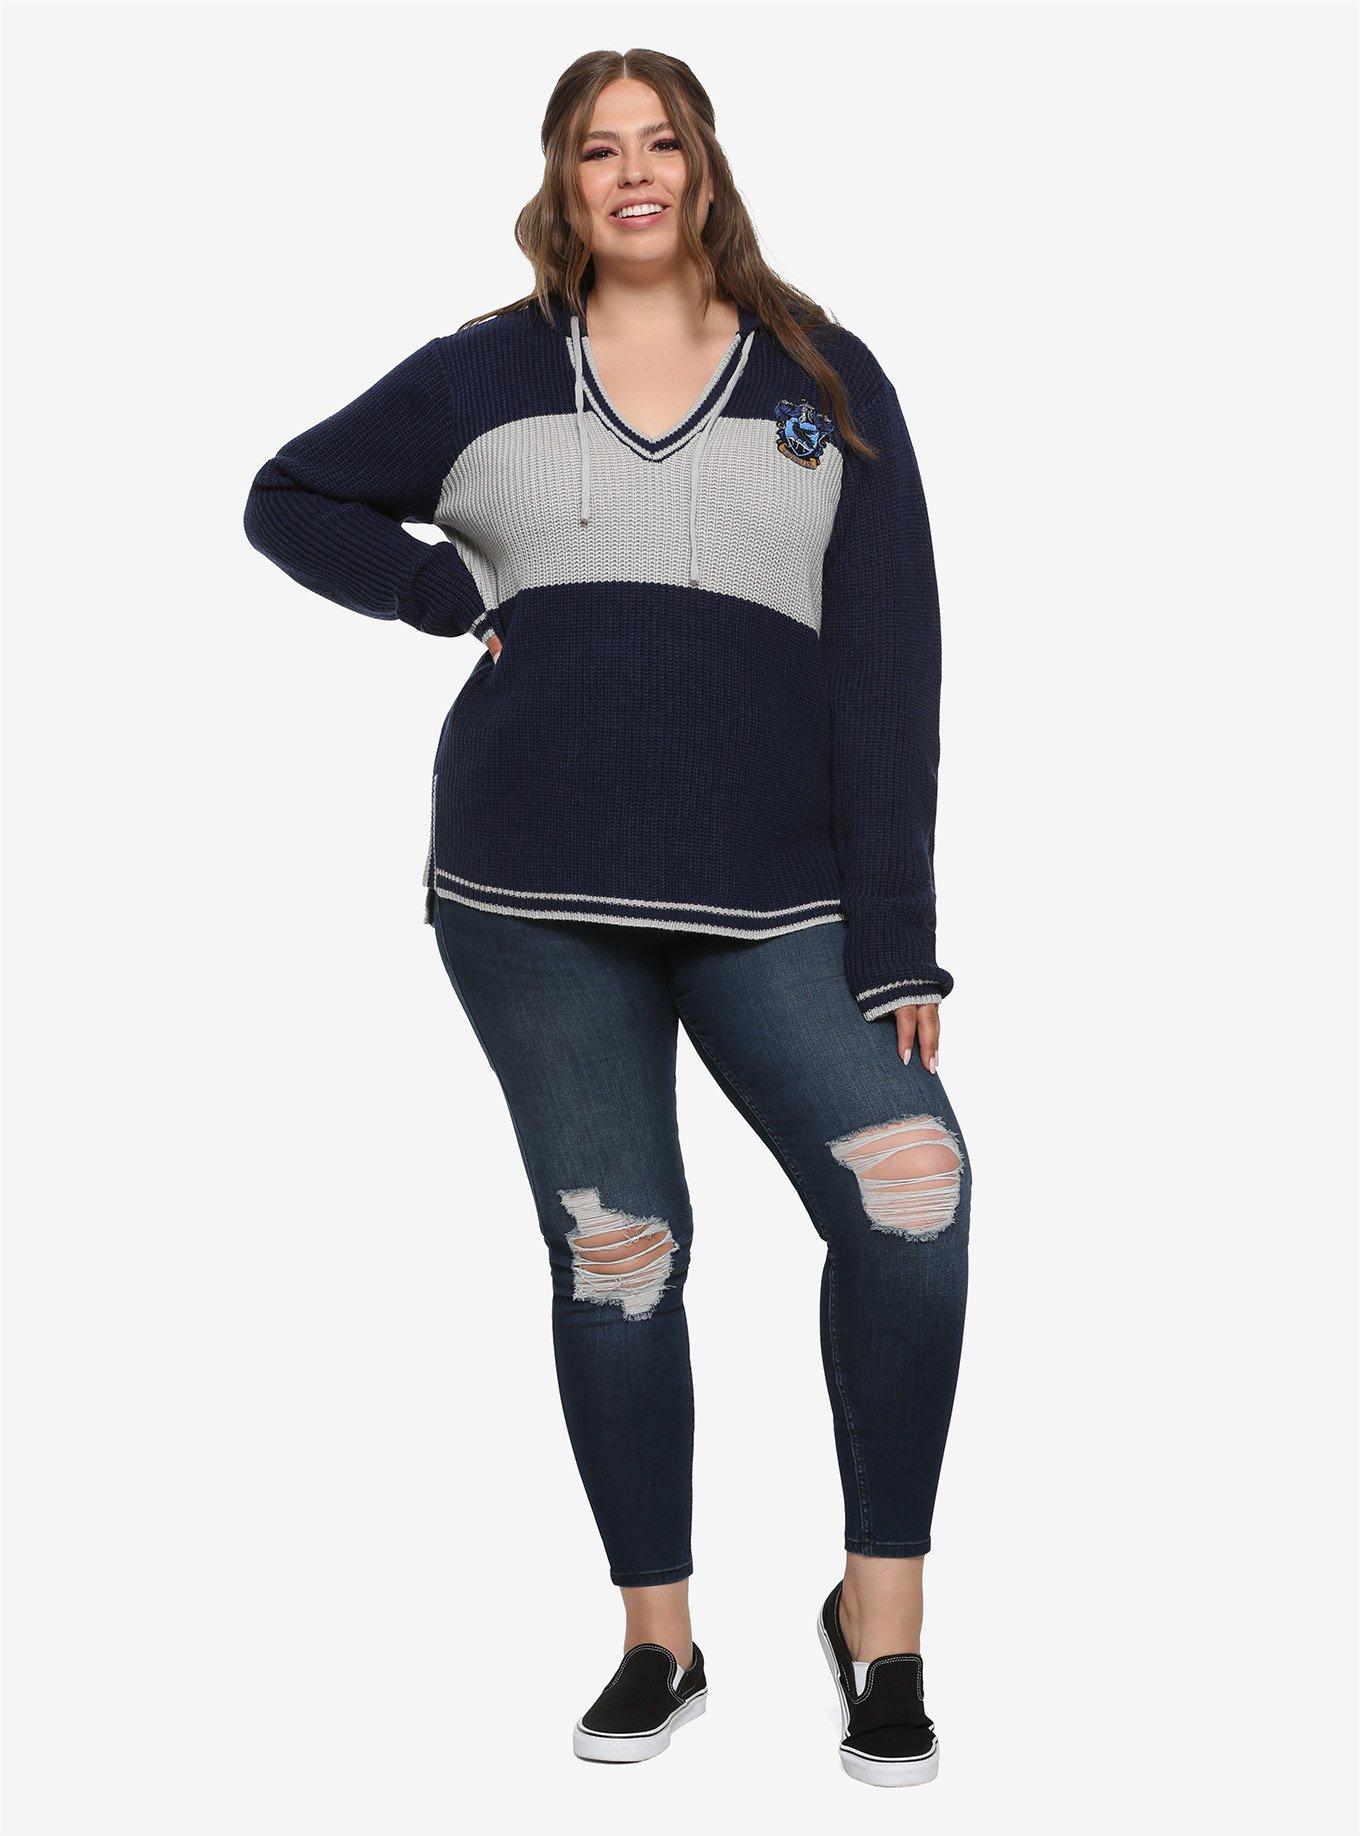 Harry Potter Ravenclaw Girls Hooded Sweater Plus Size, , alternate